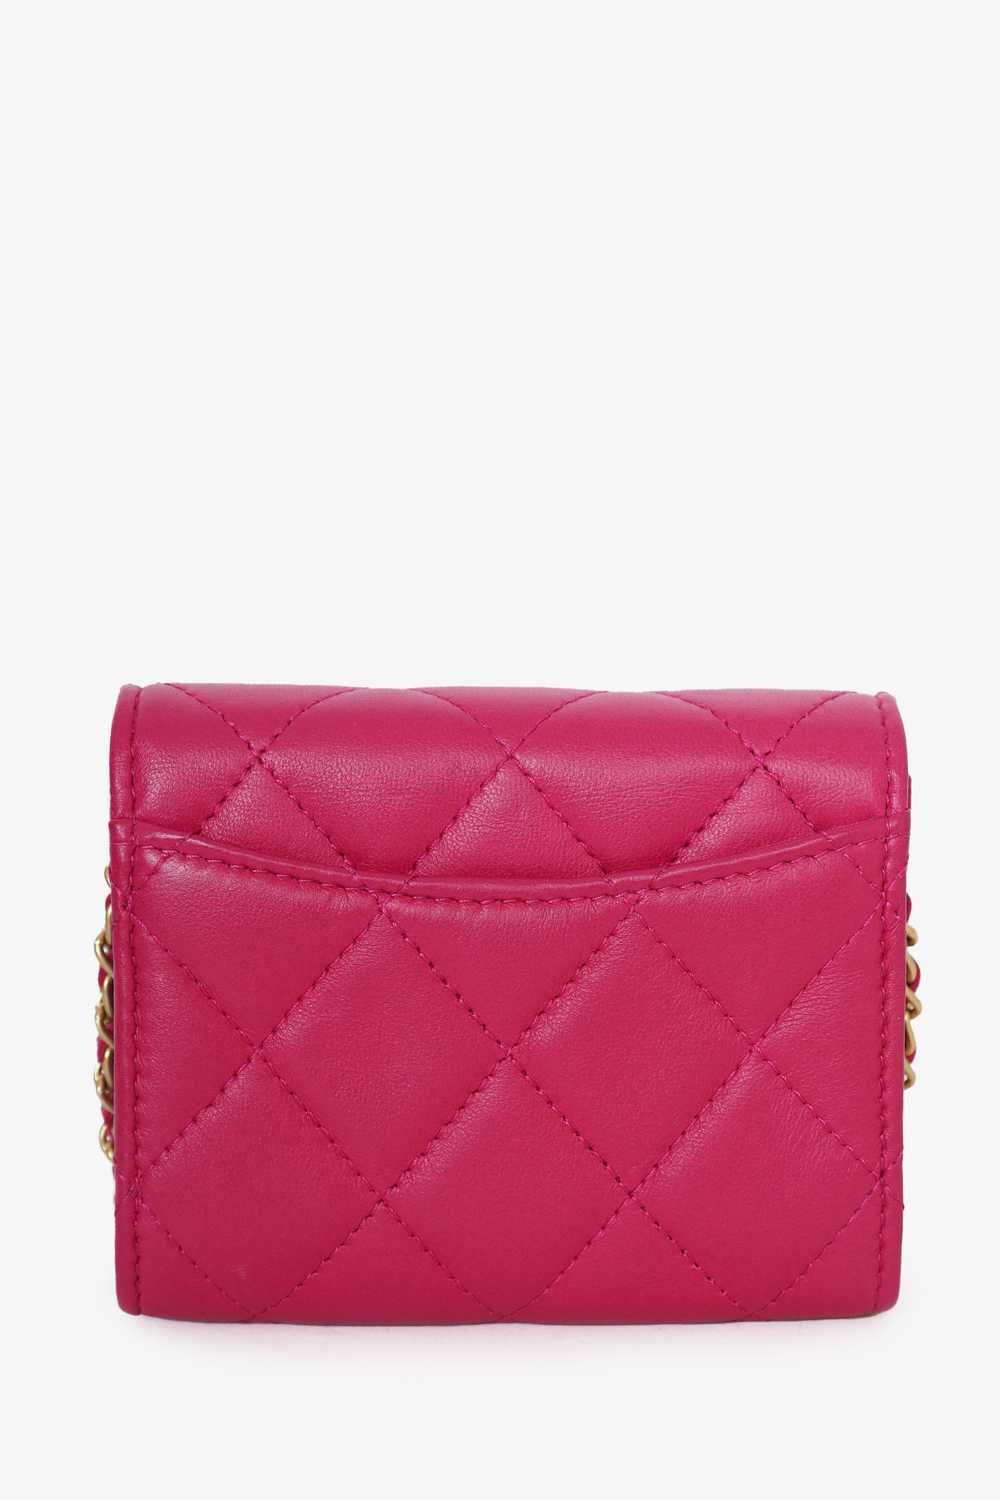 Pre-loved Chanel™ Pink Quilted Leather Pearl Crus… - image 5